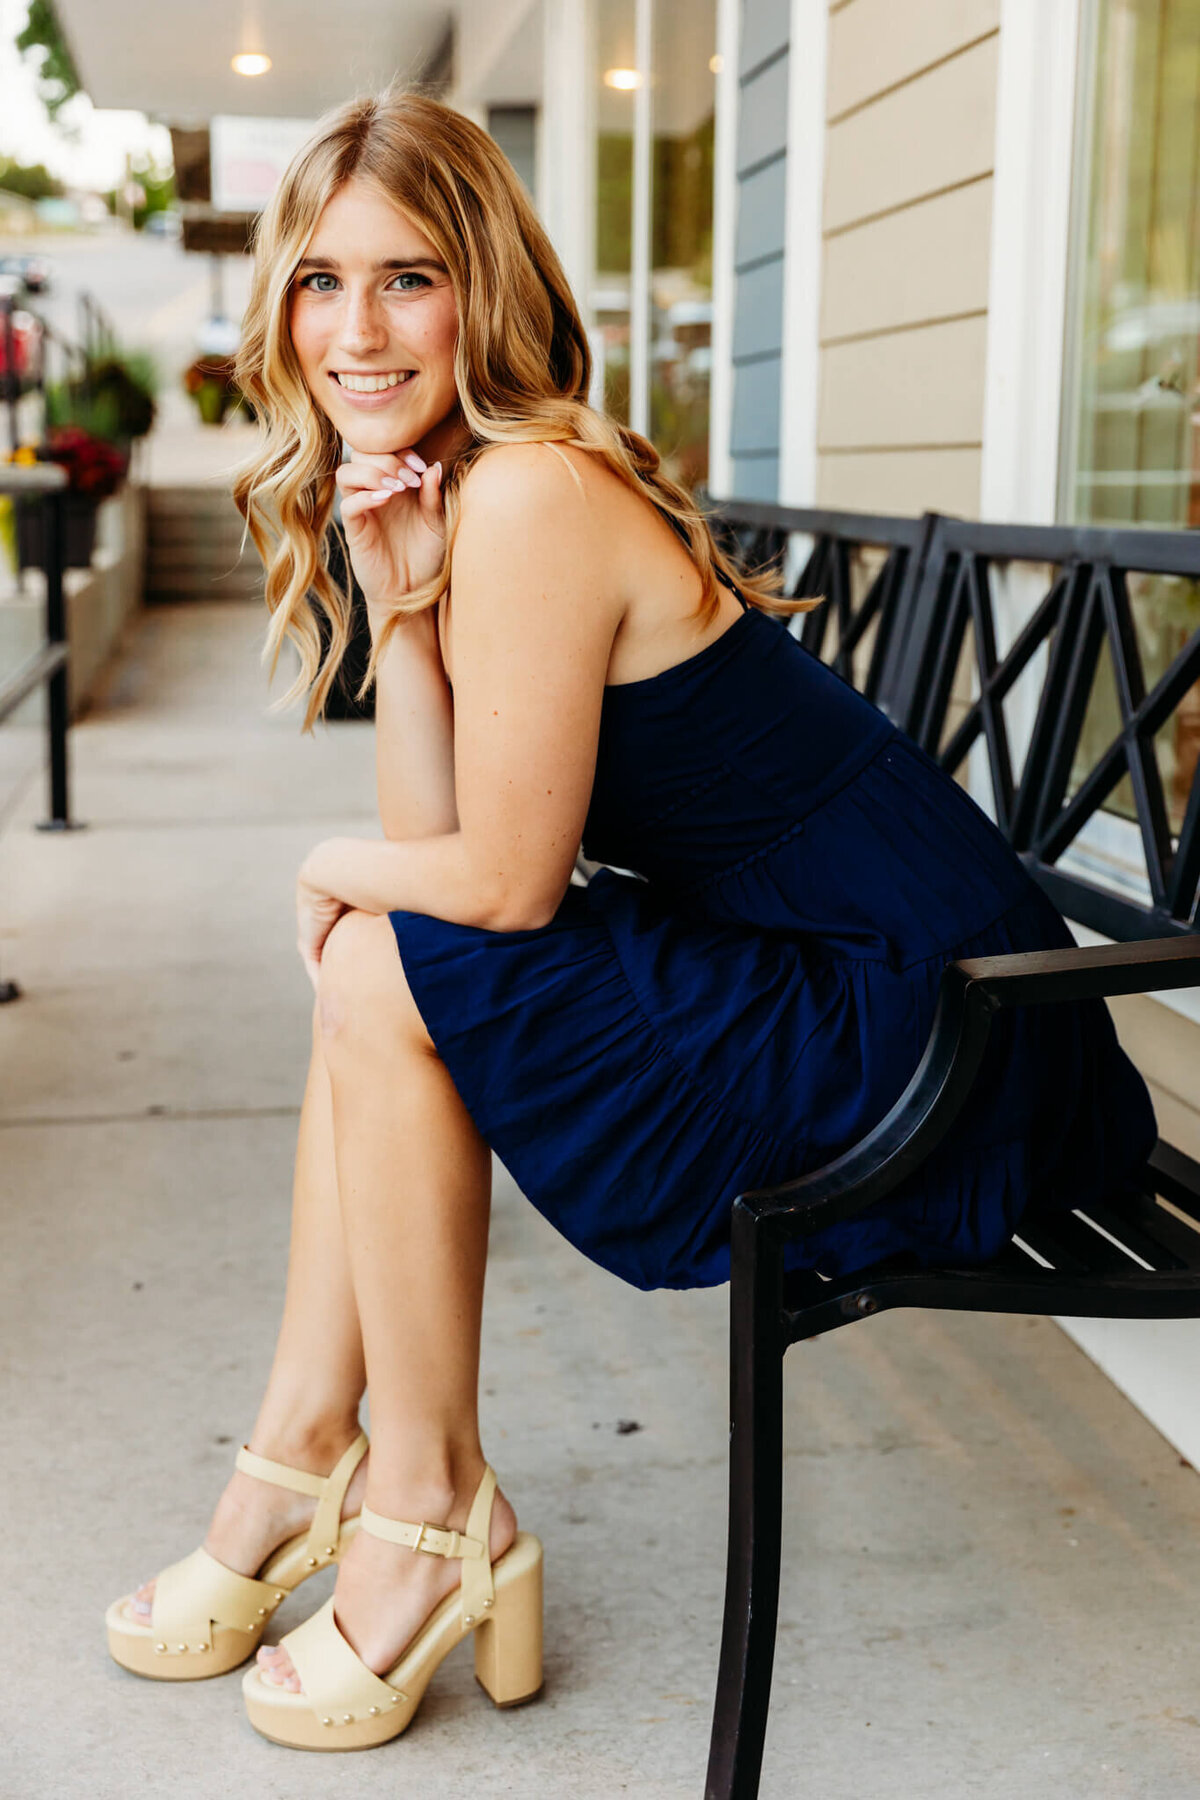 senior girl in a navy blue dress leaning forward while sitting on a bench